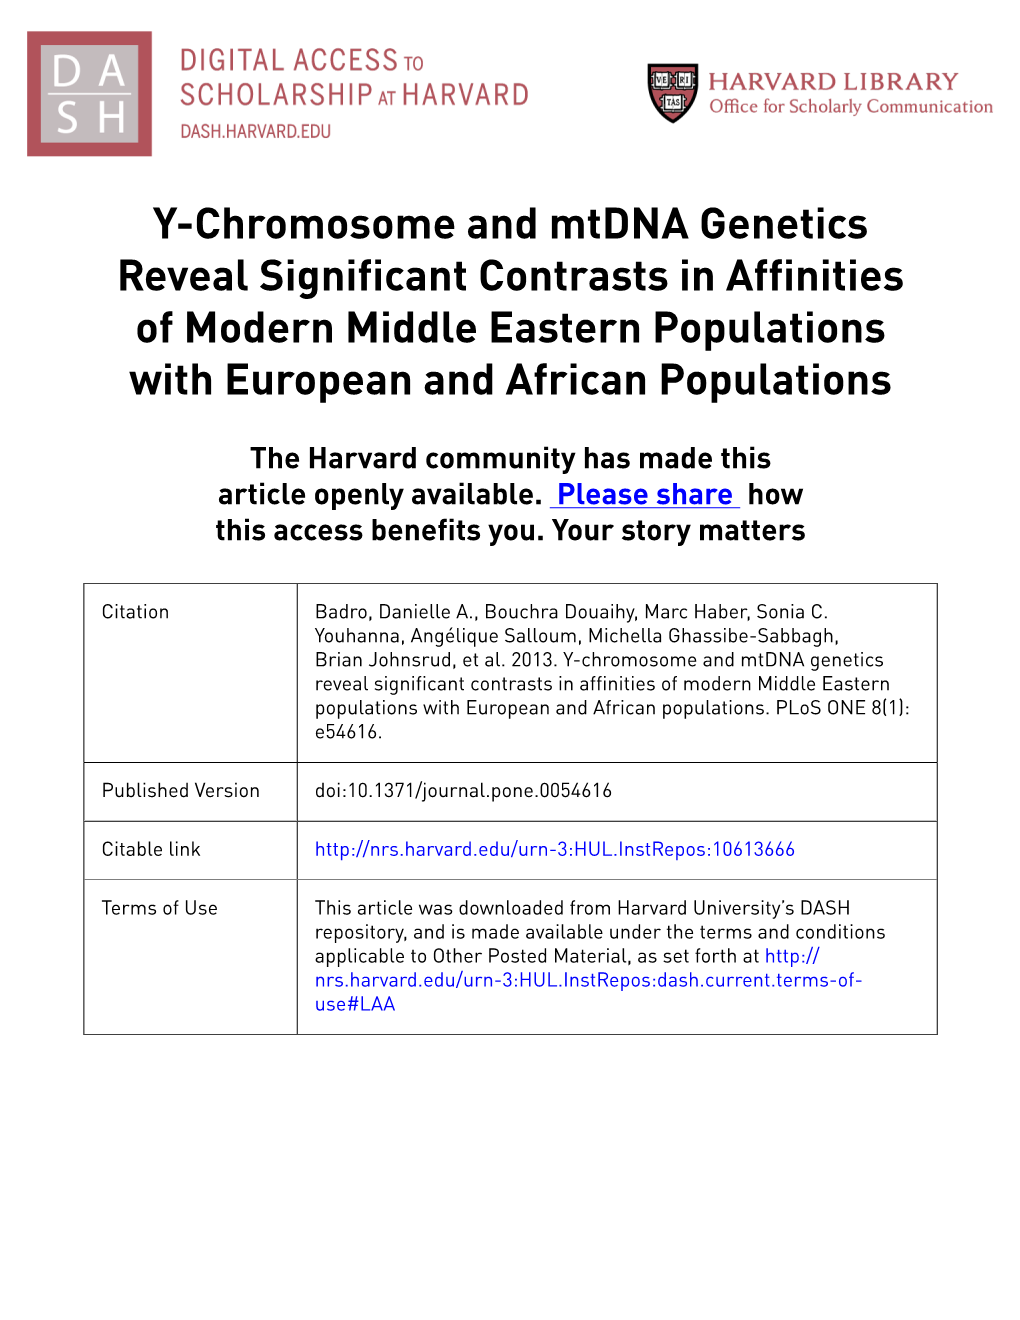 Y-Chromosome and Mtdna Genetics Reveal Significant Contrasts in Affinities of Modern Middle Eastern Populations with European and African Populations